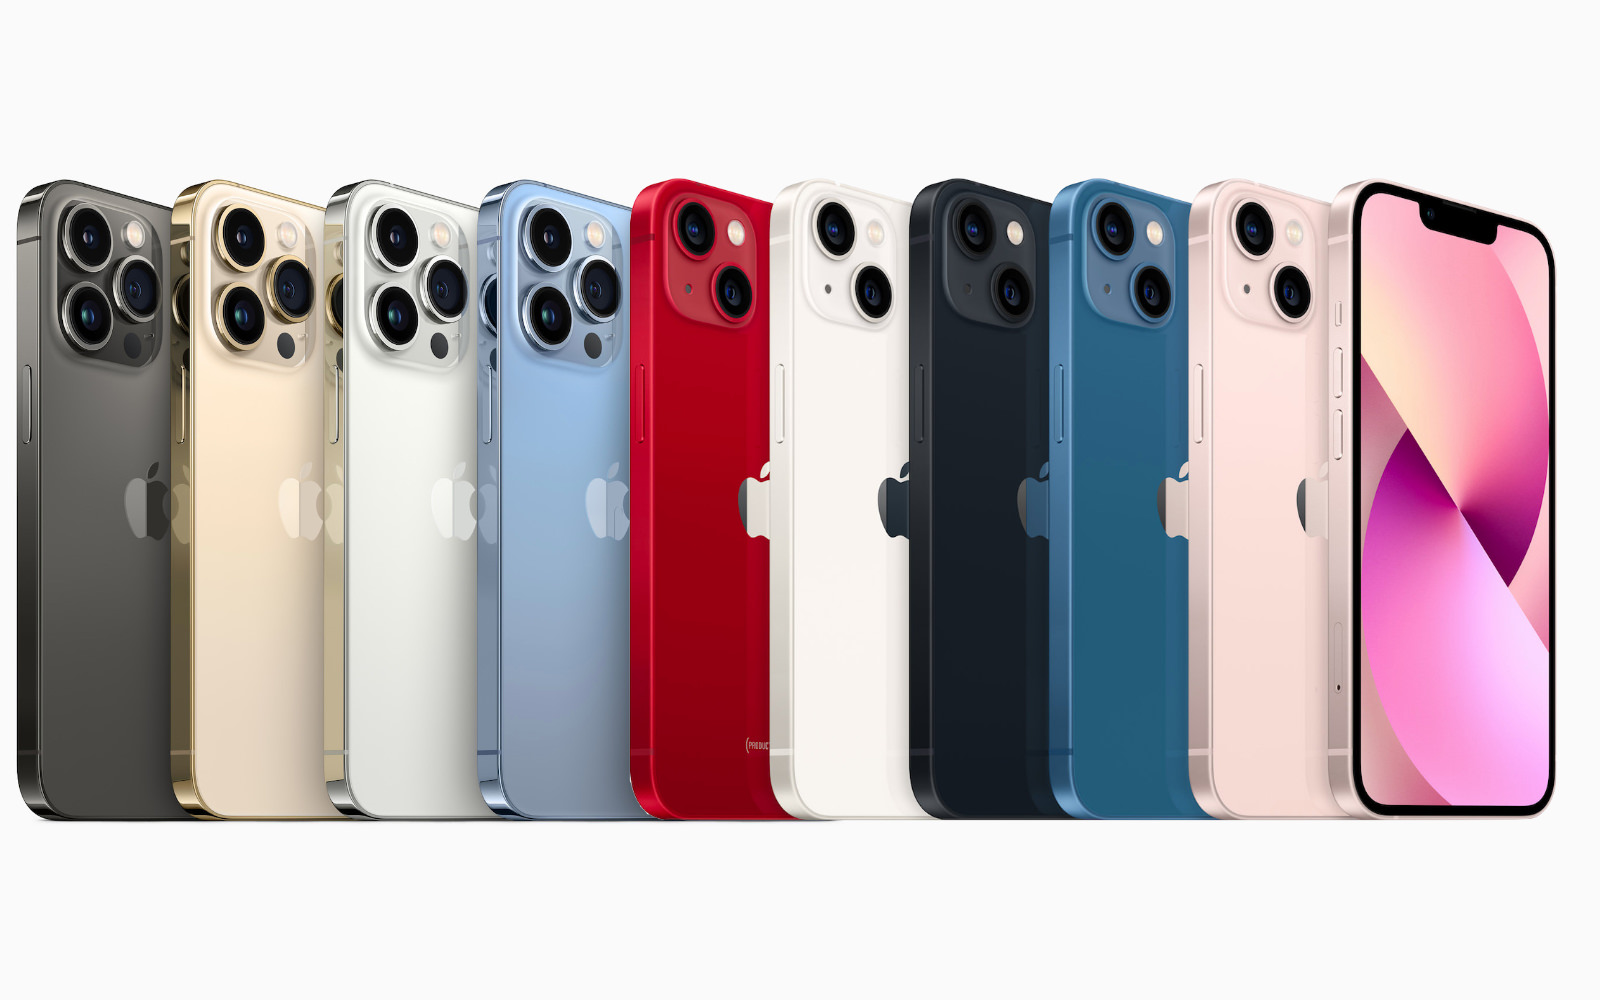 Iphone13 series all colors